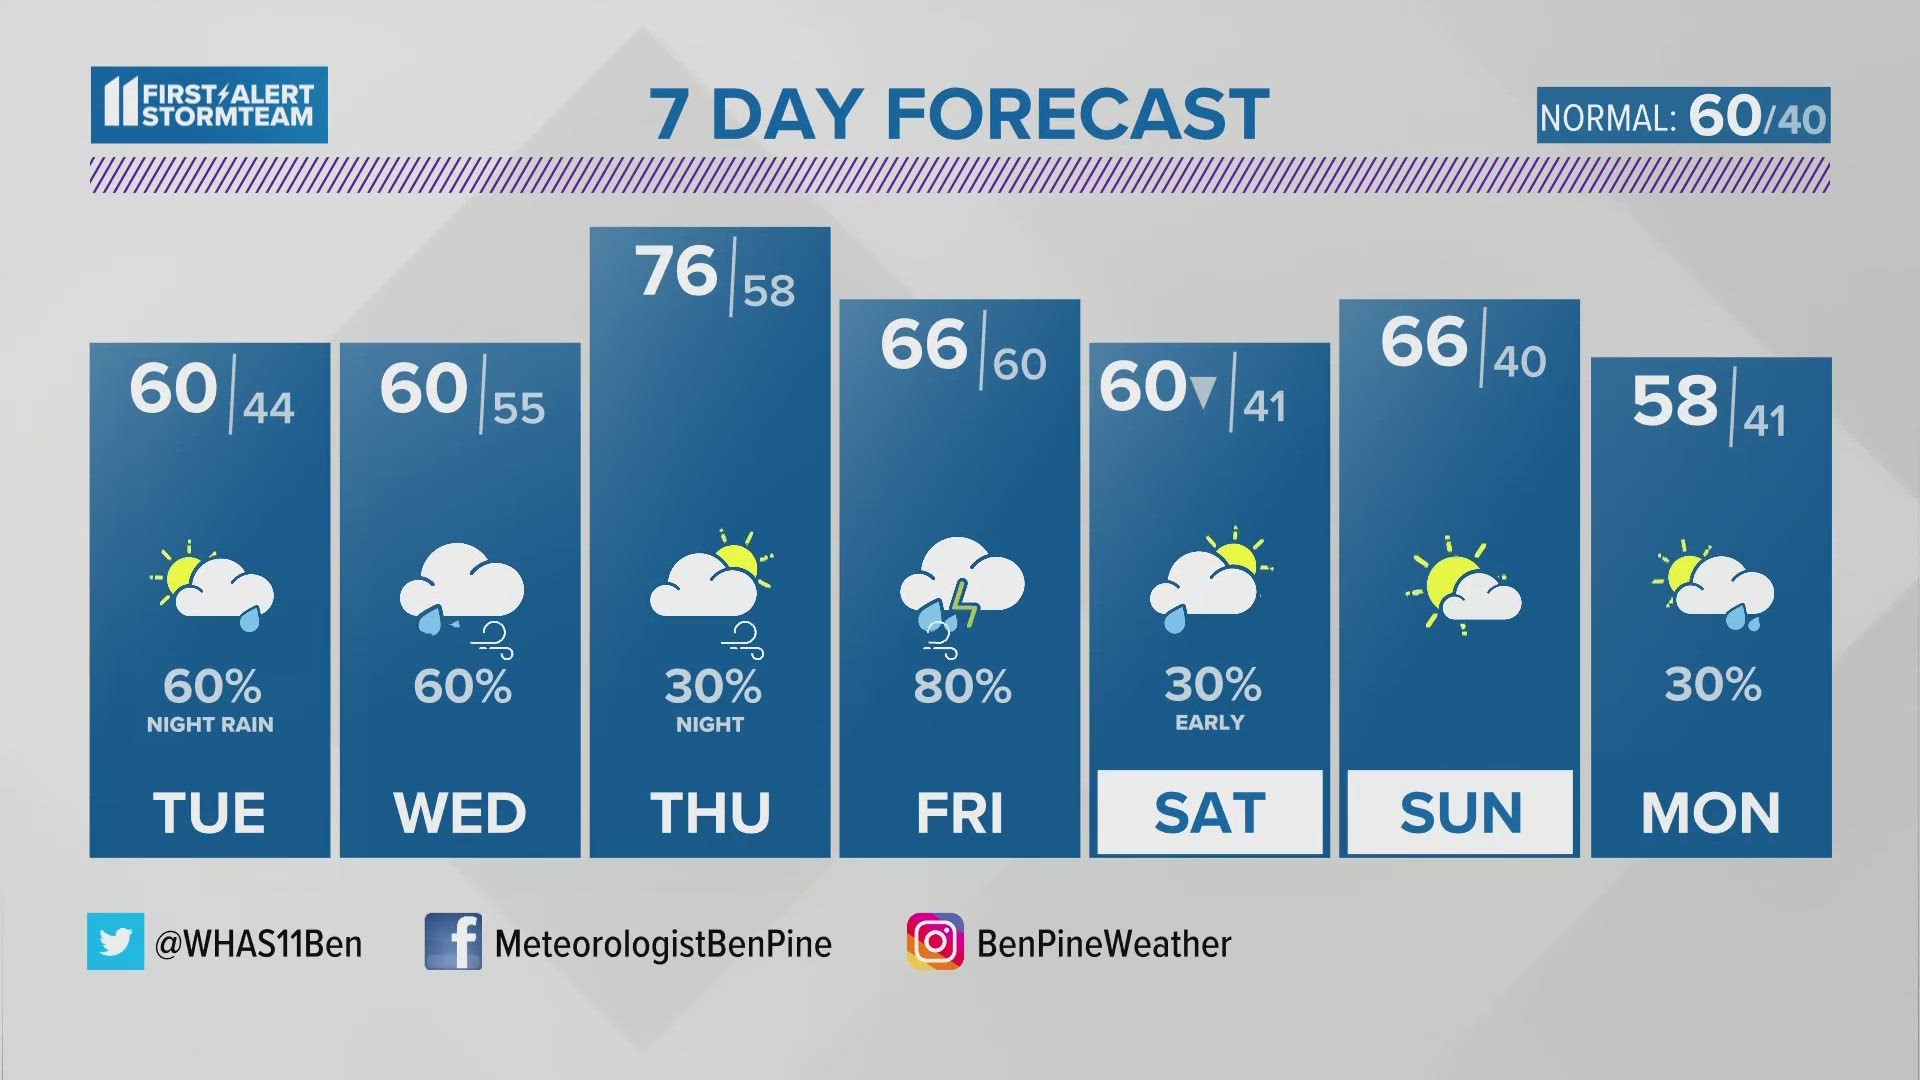 Our week ahead will be milder, but with plenty of rain chances.